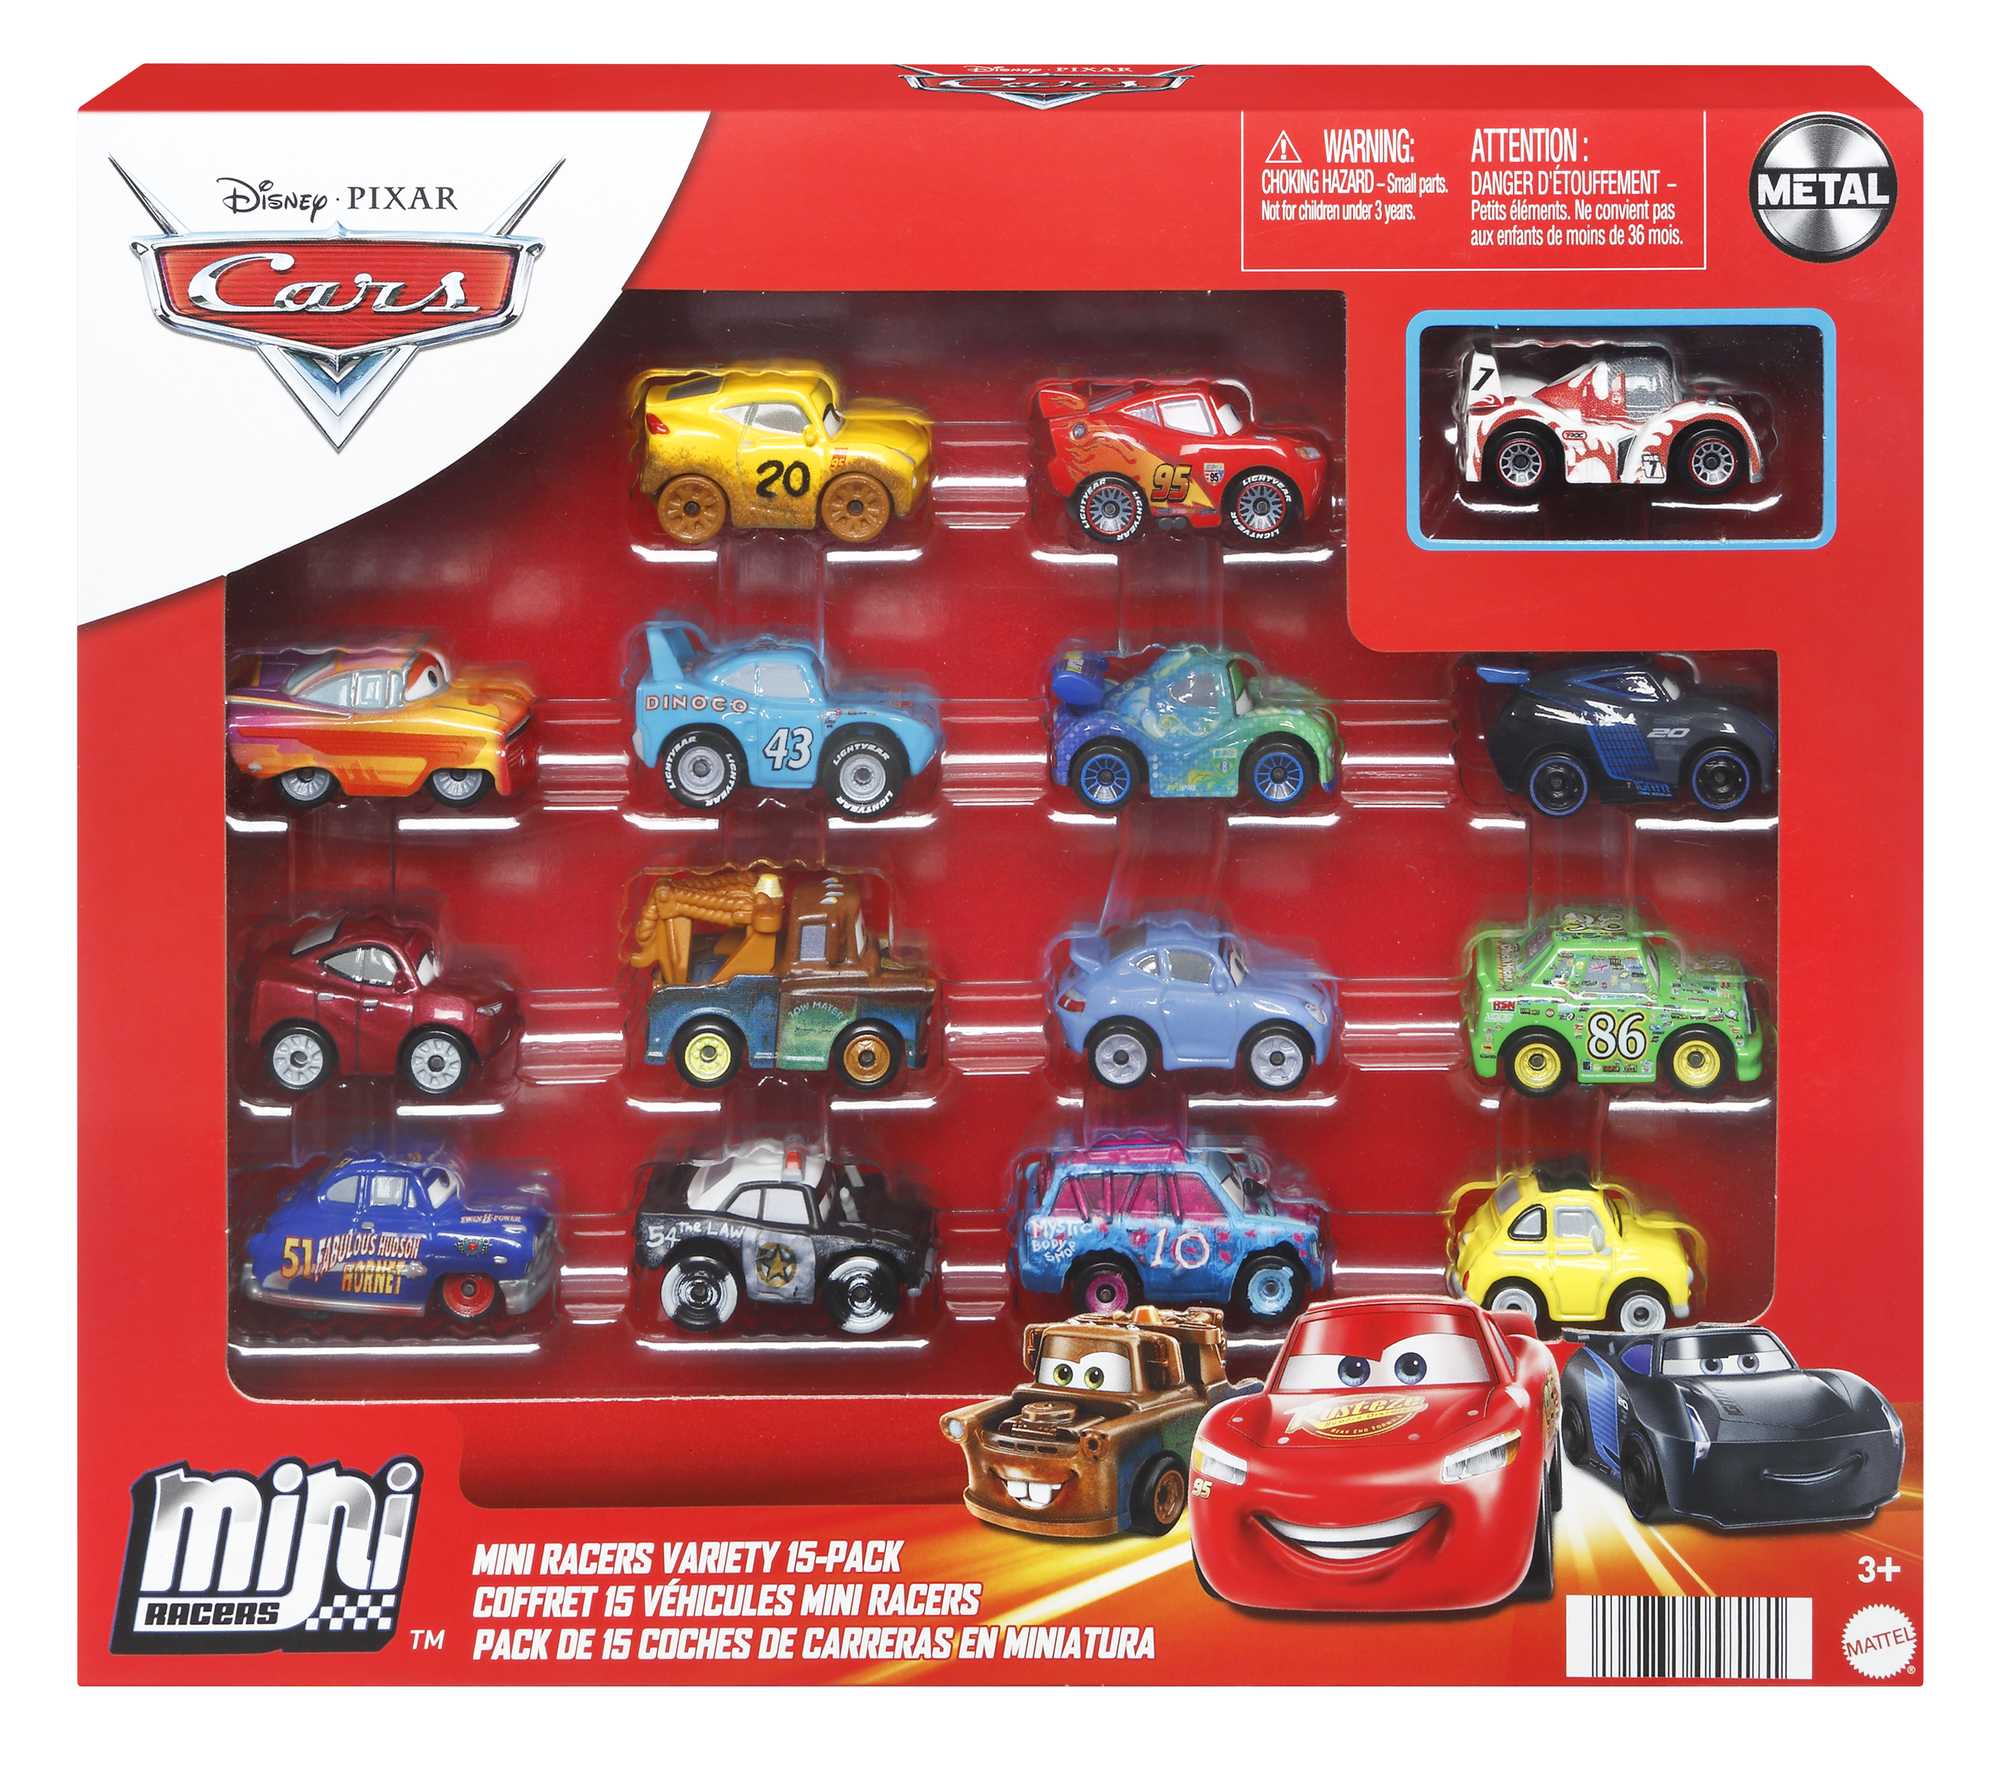 Disney and Pixar Cars Toys, 15-Pack Toy Cars